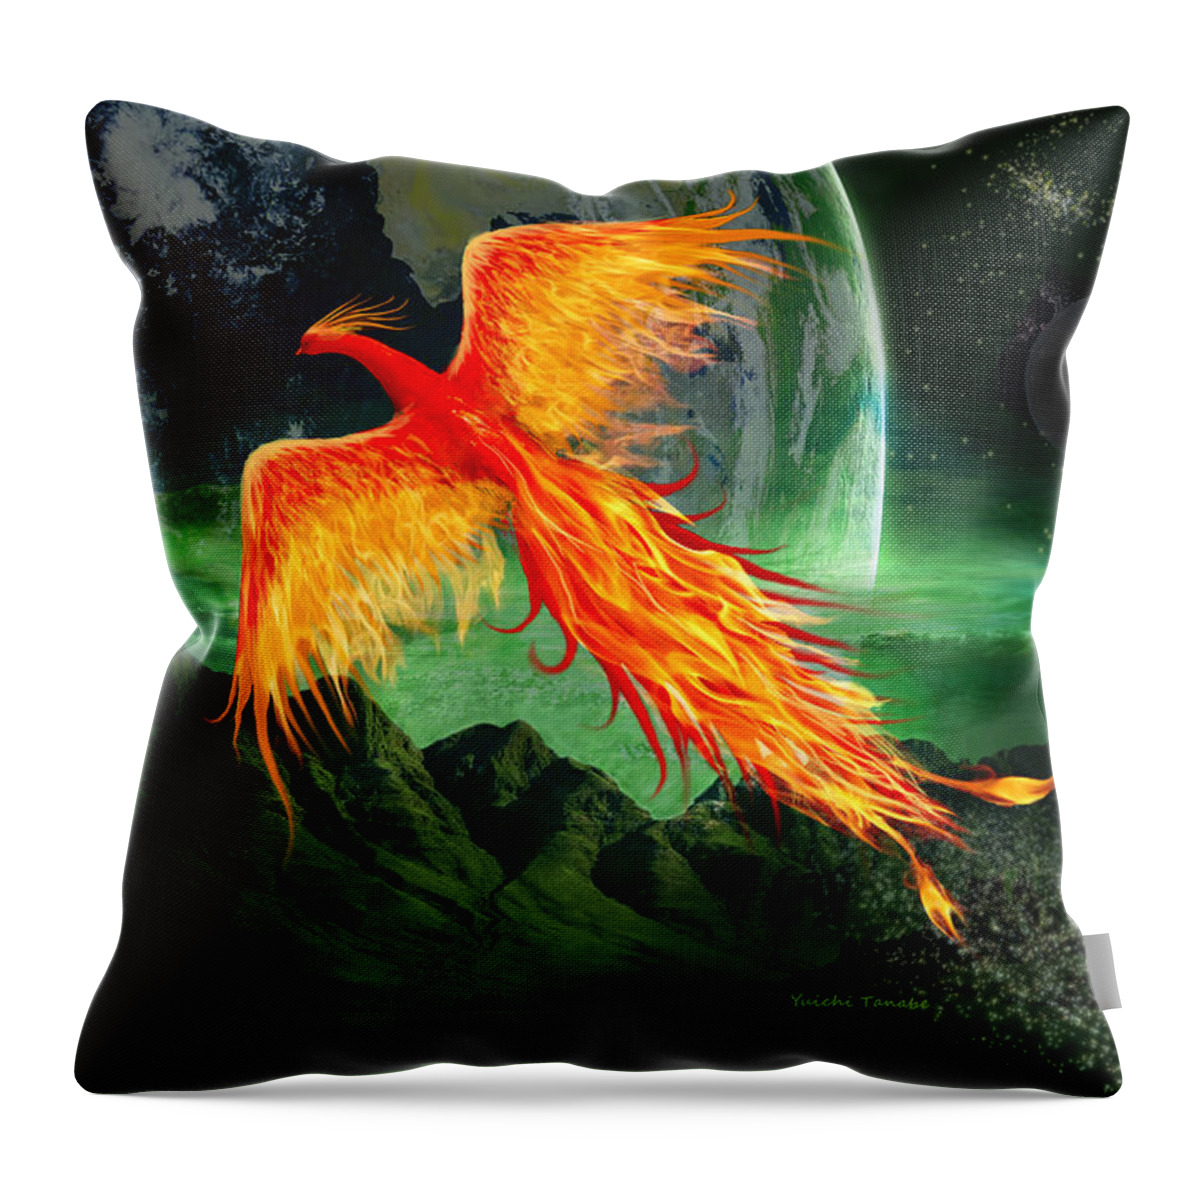 Phoenix Throw Pillow featuring the digital art High Flying Phoenix by Yuichi Tanabe